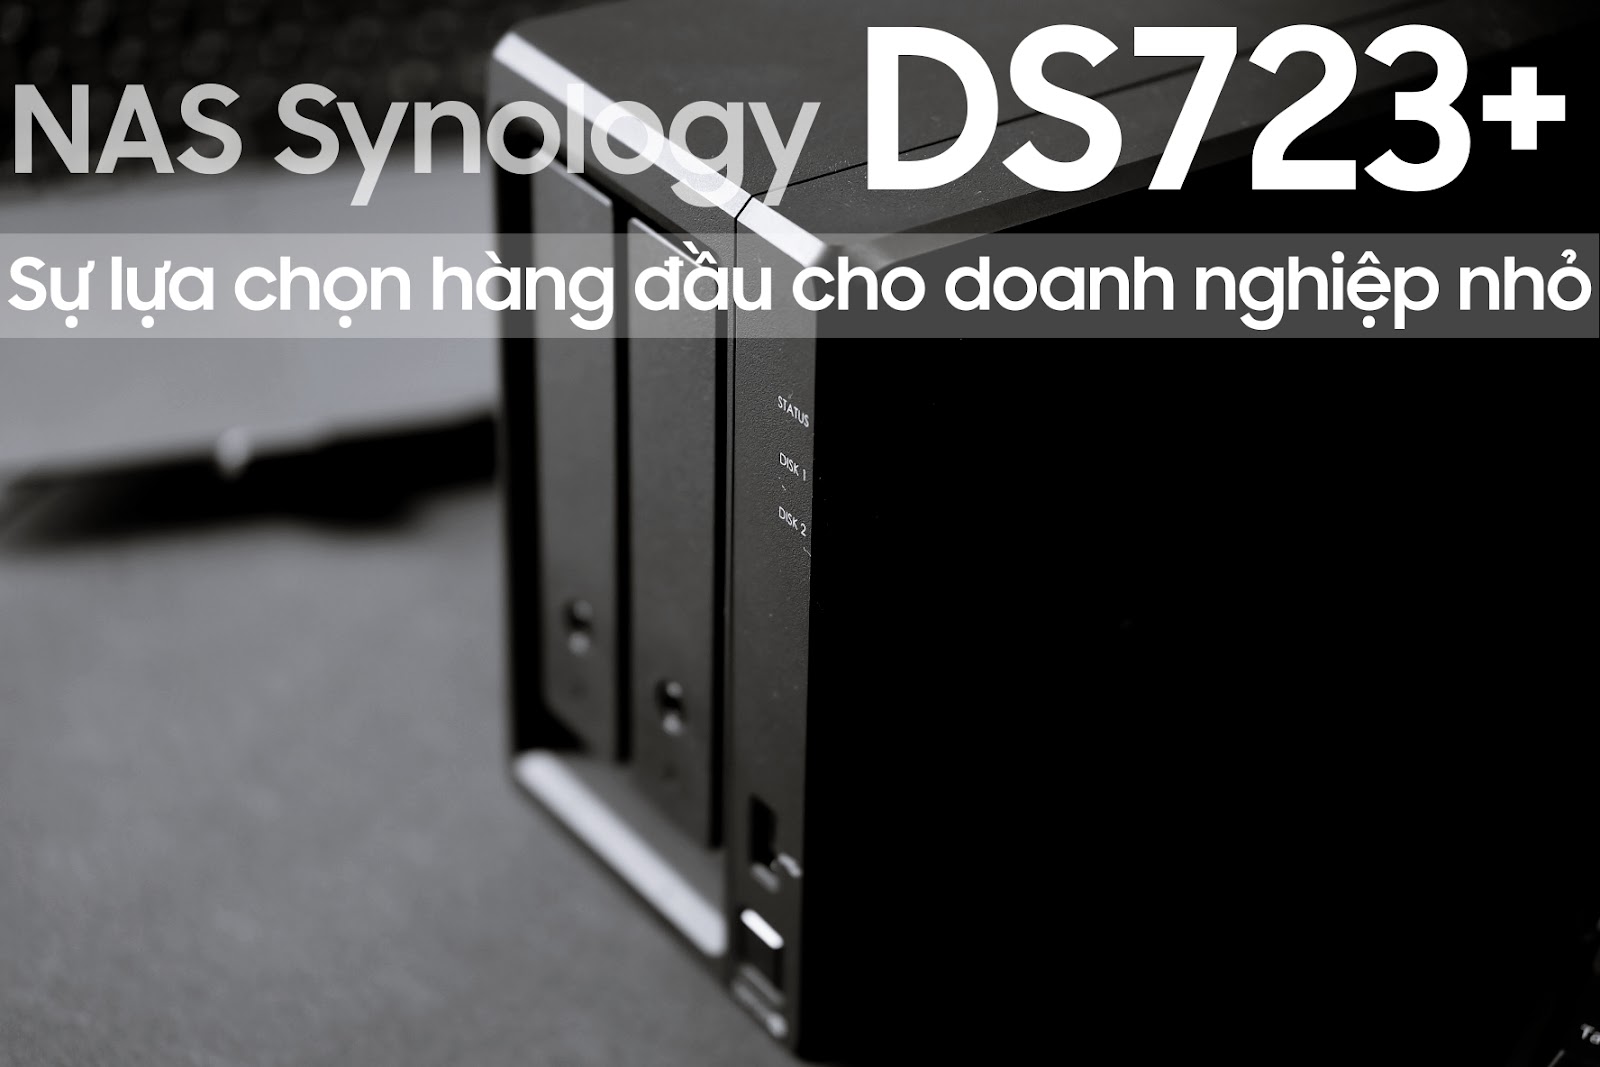 Synology NAS DS723+ – A secure solution to store and protect data for small businesses in 2023